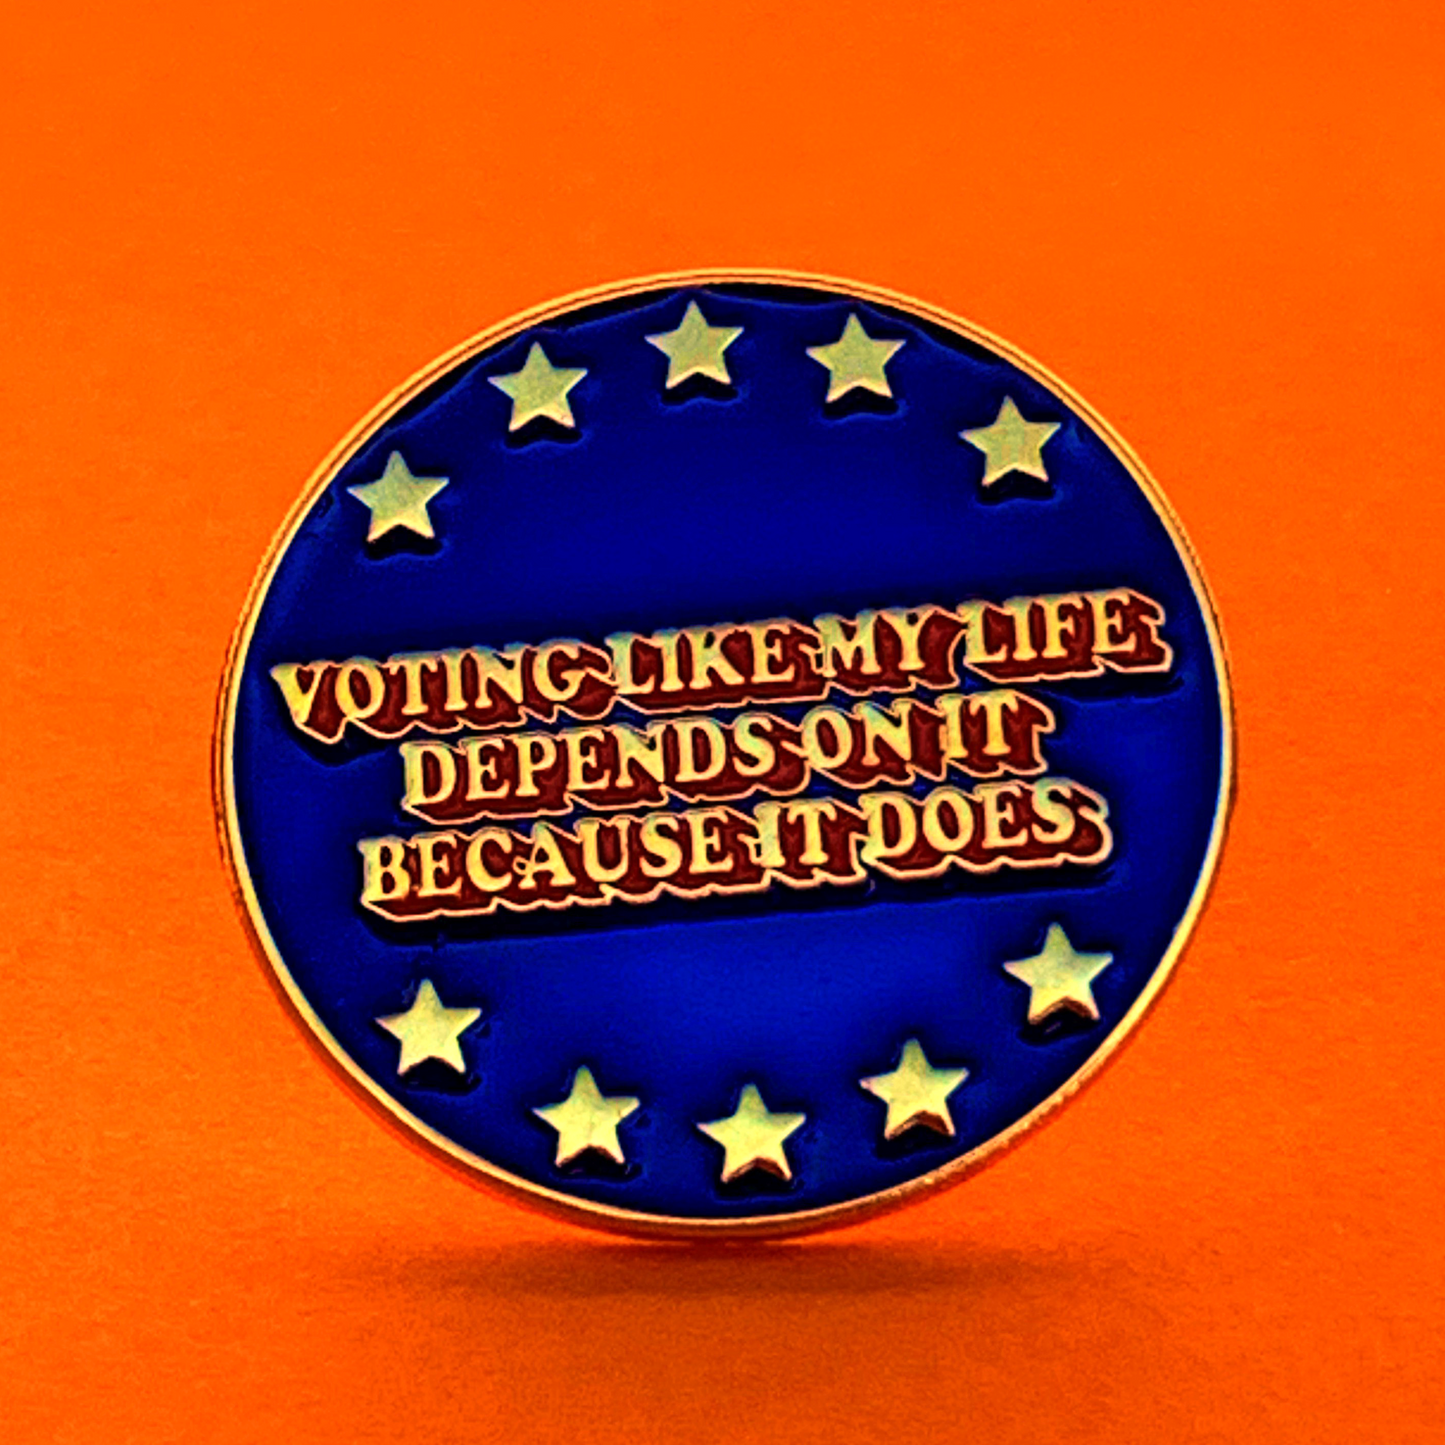 Voting Like My Life Depends On It enamel pin - Brownie Points for You